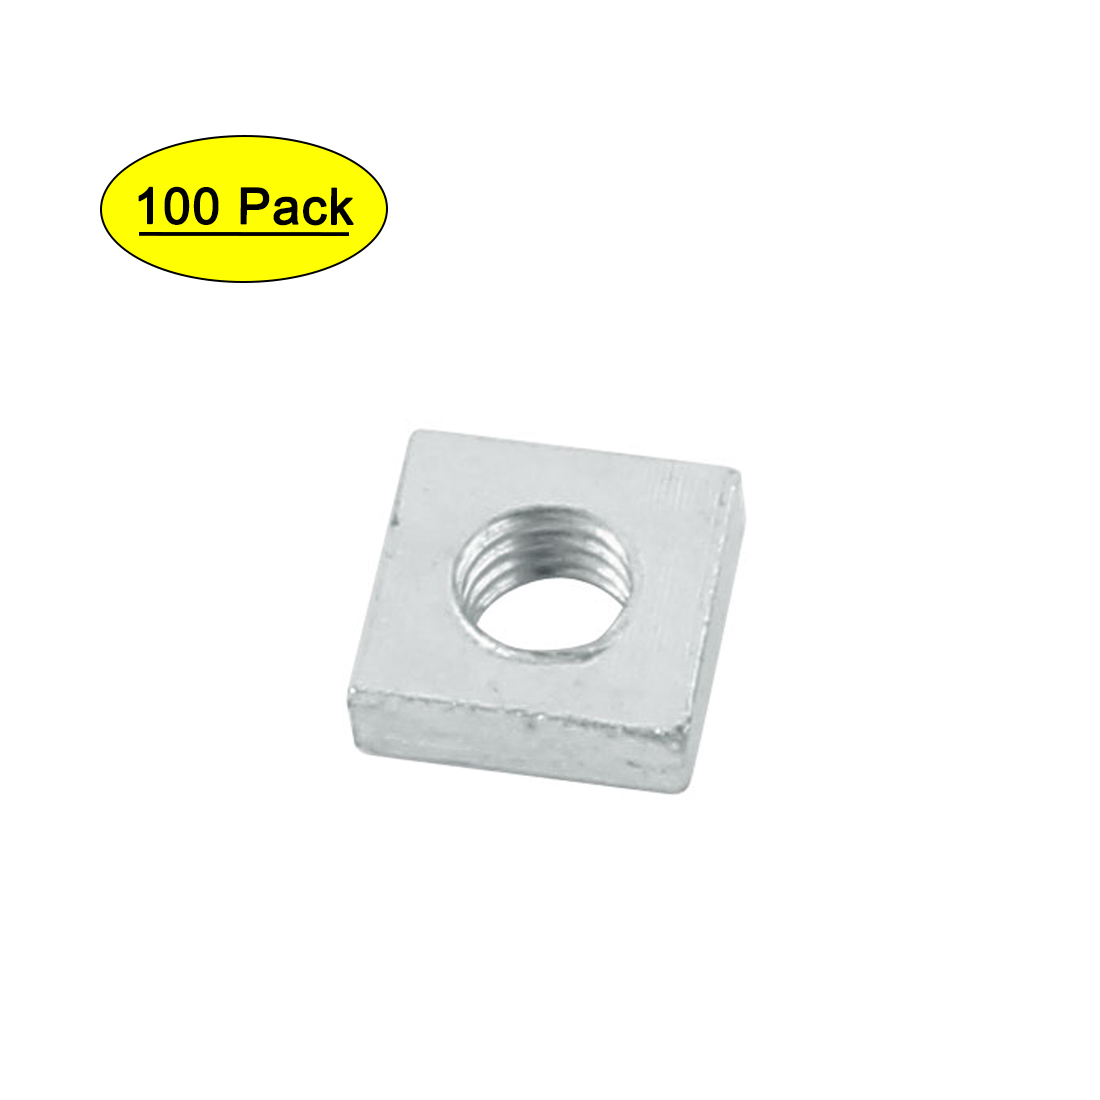 M3 5.4 x 5.4 x 2mm Stainless Steel Square Machine Screw Nuts Fastener (100-pack) - image 1 of 5